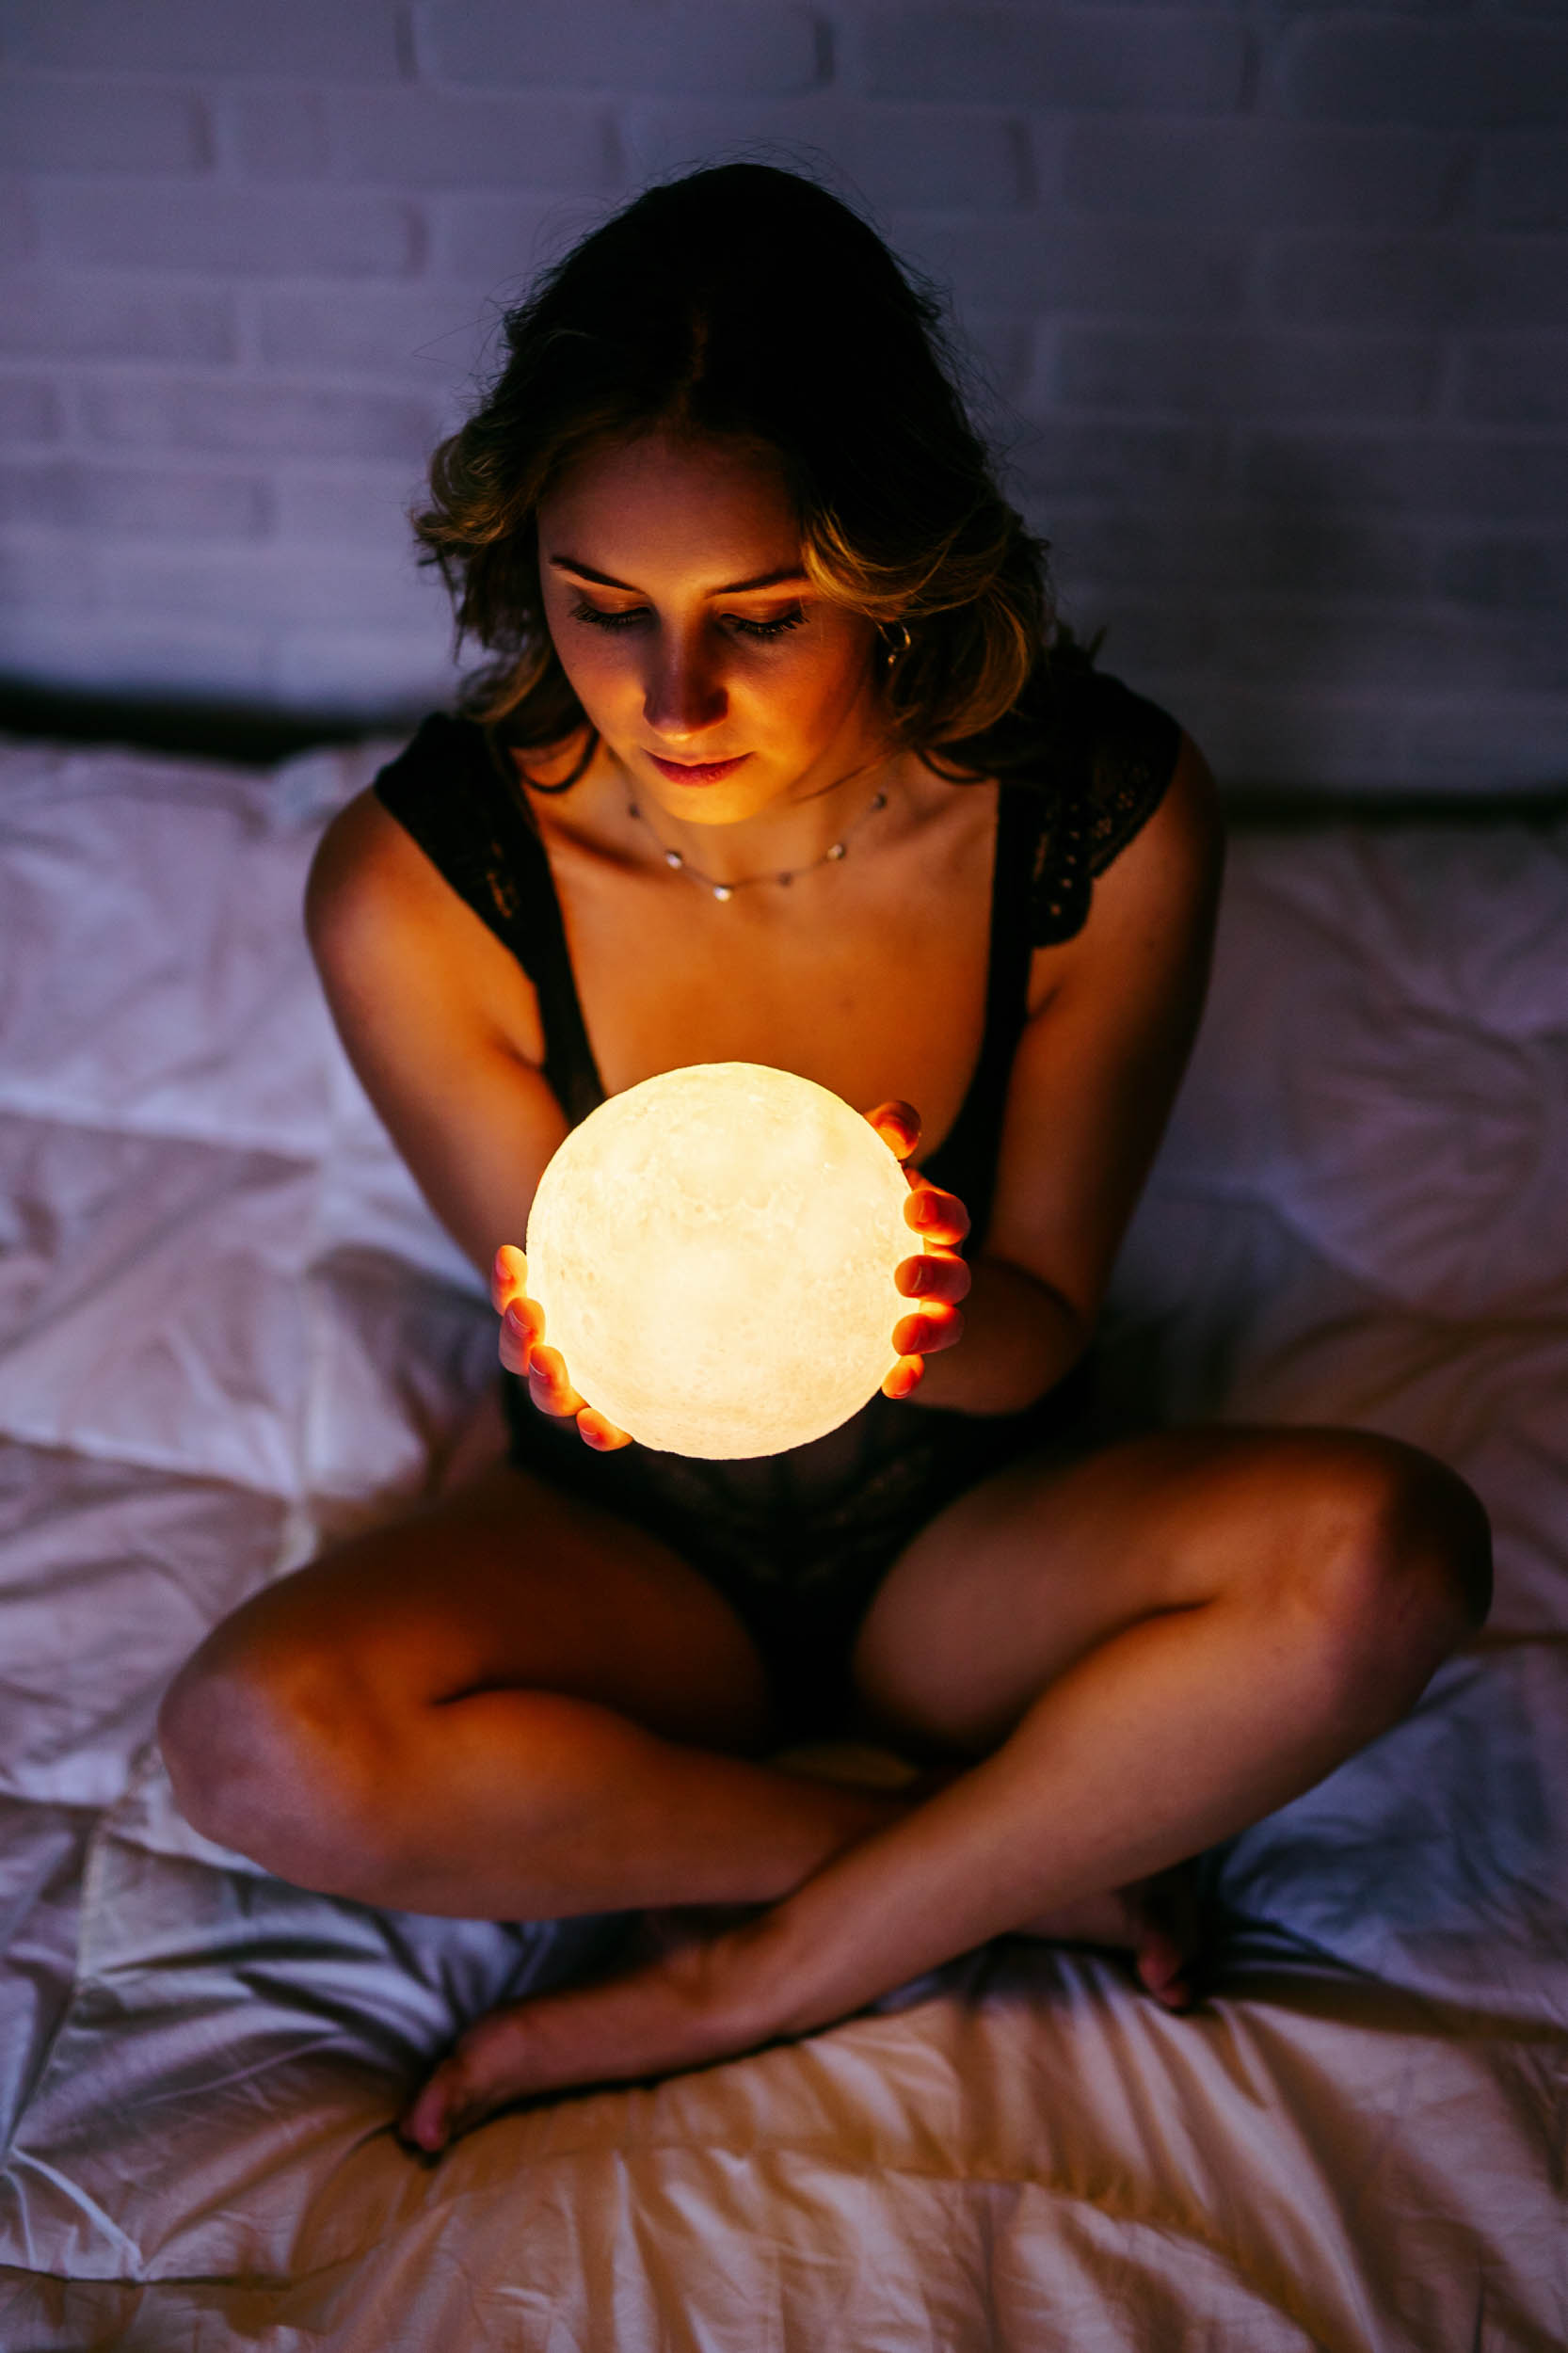 A woman sits on a bed and holds a moon.